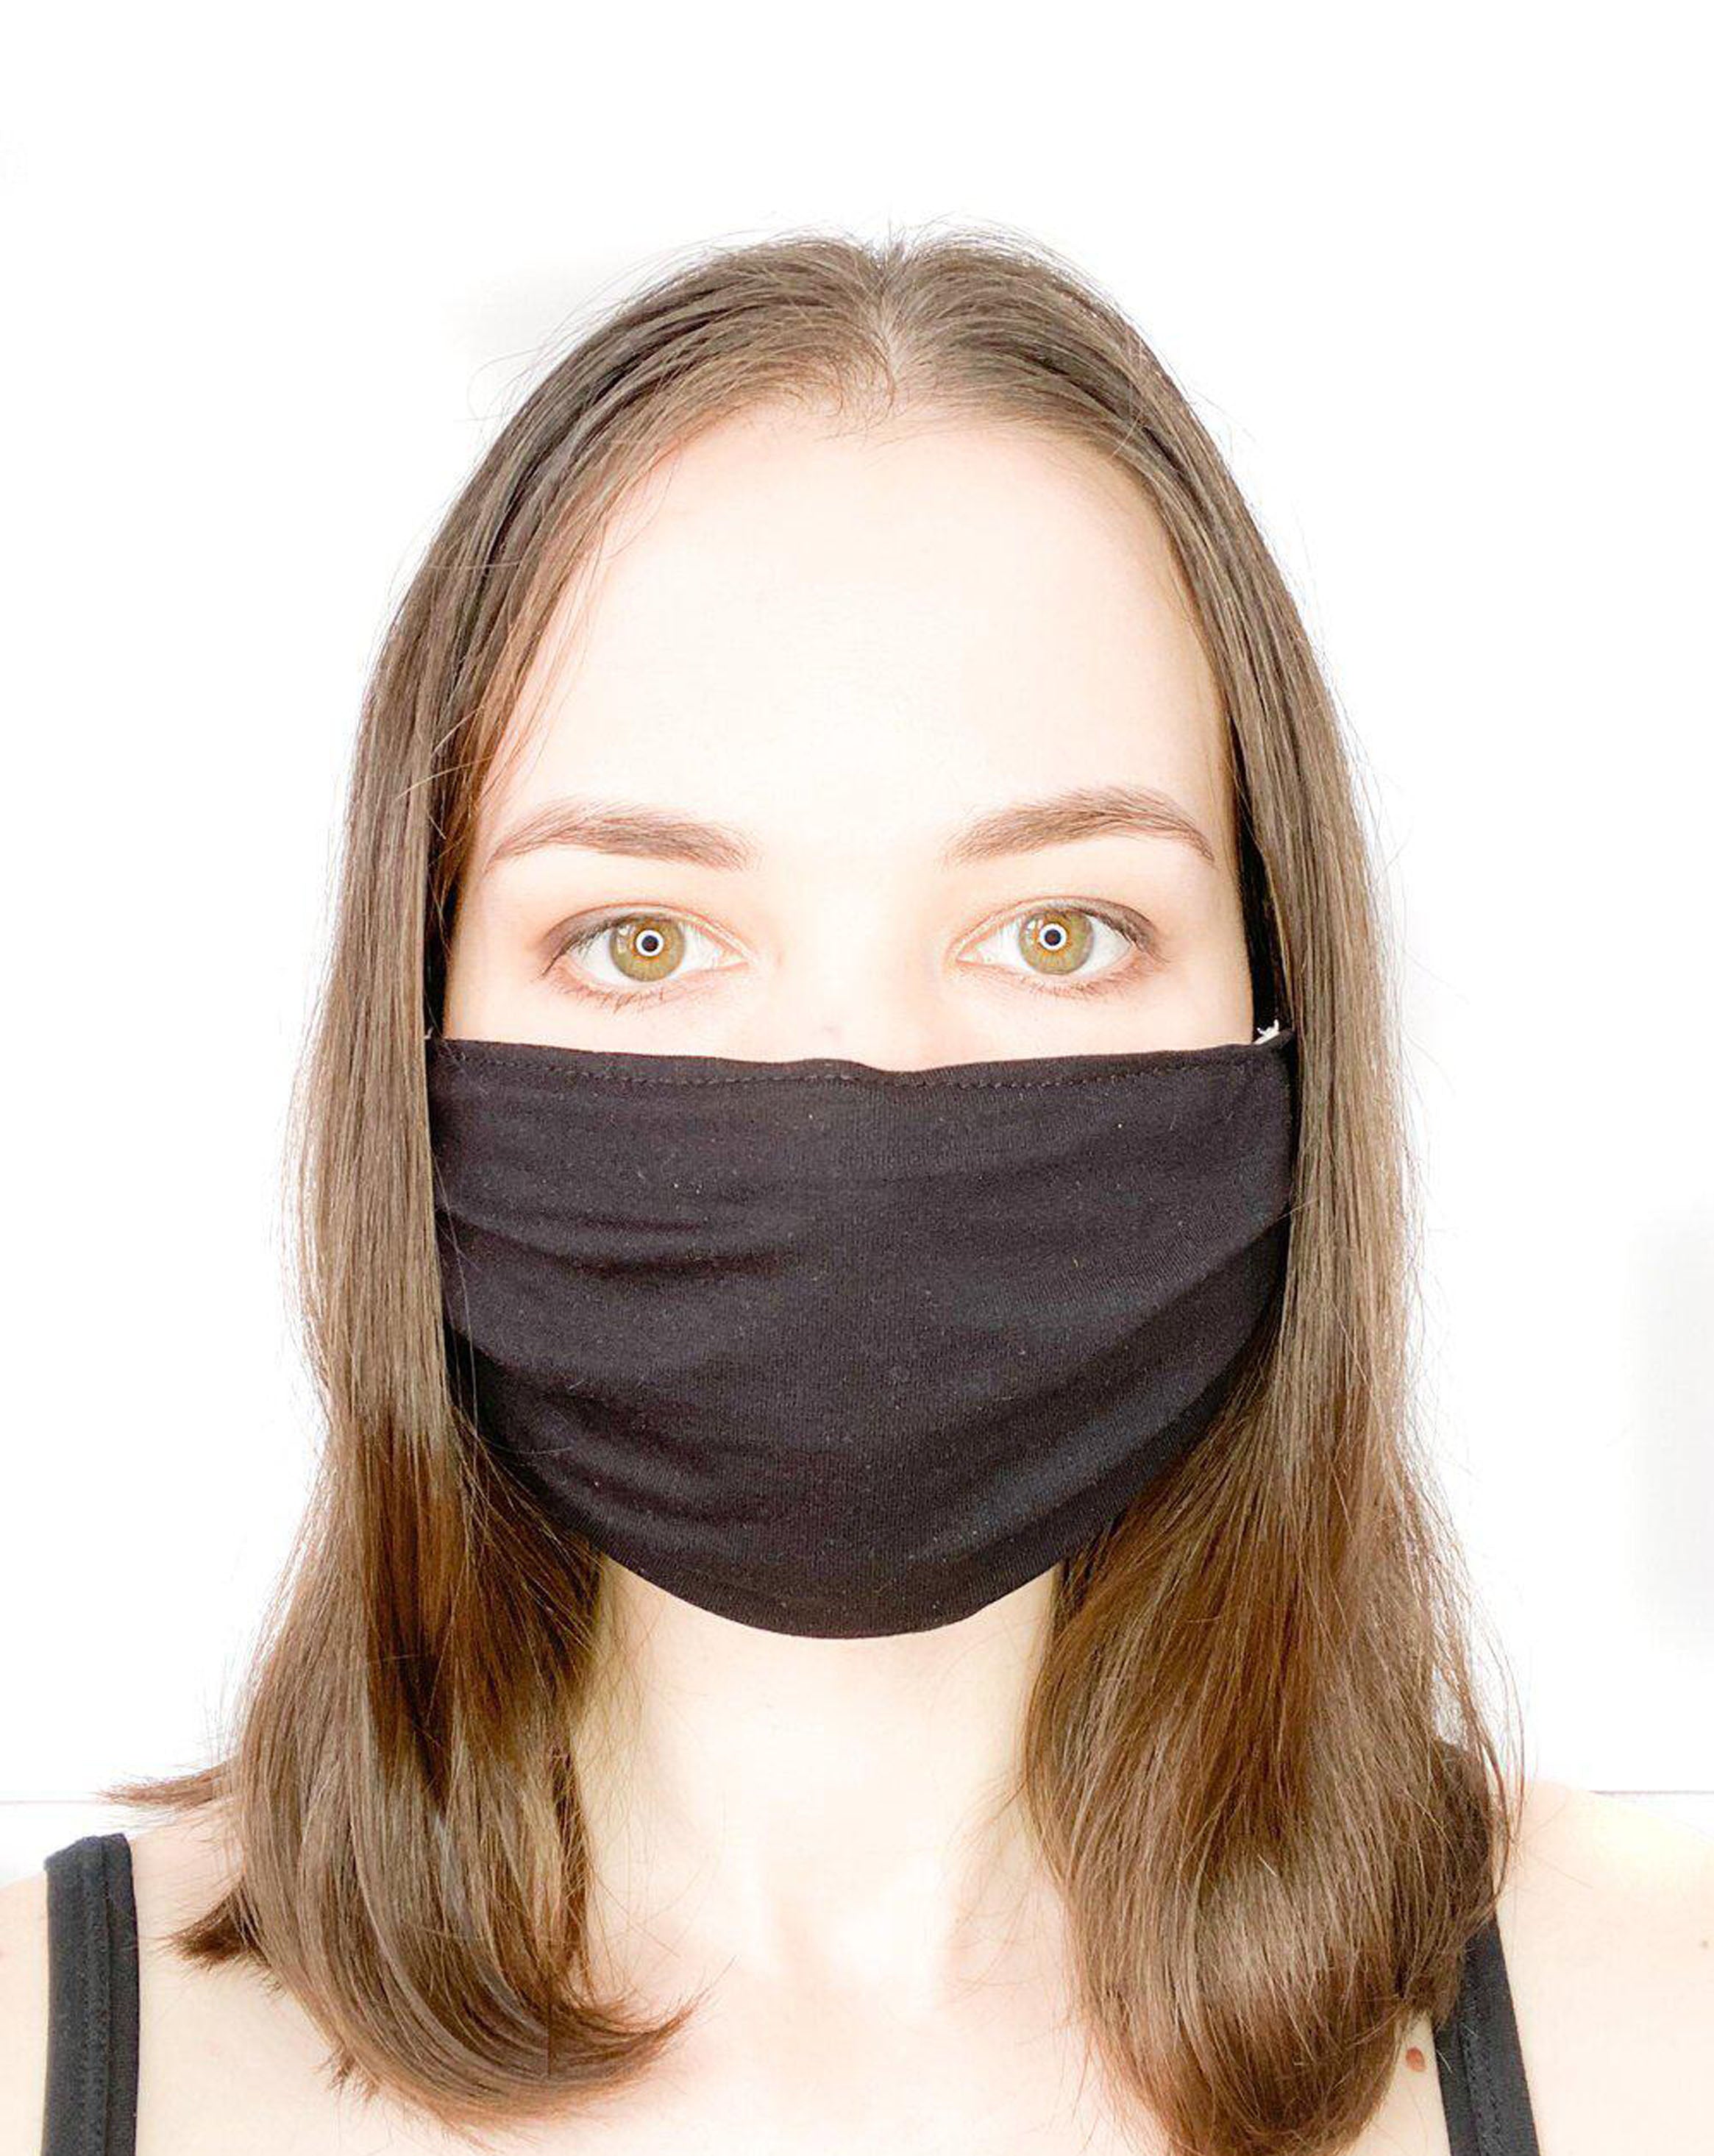 Model with brown hair wearing a black, organic cotton facemask.